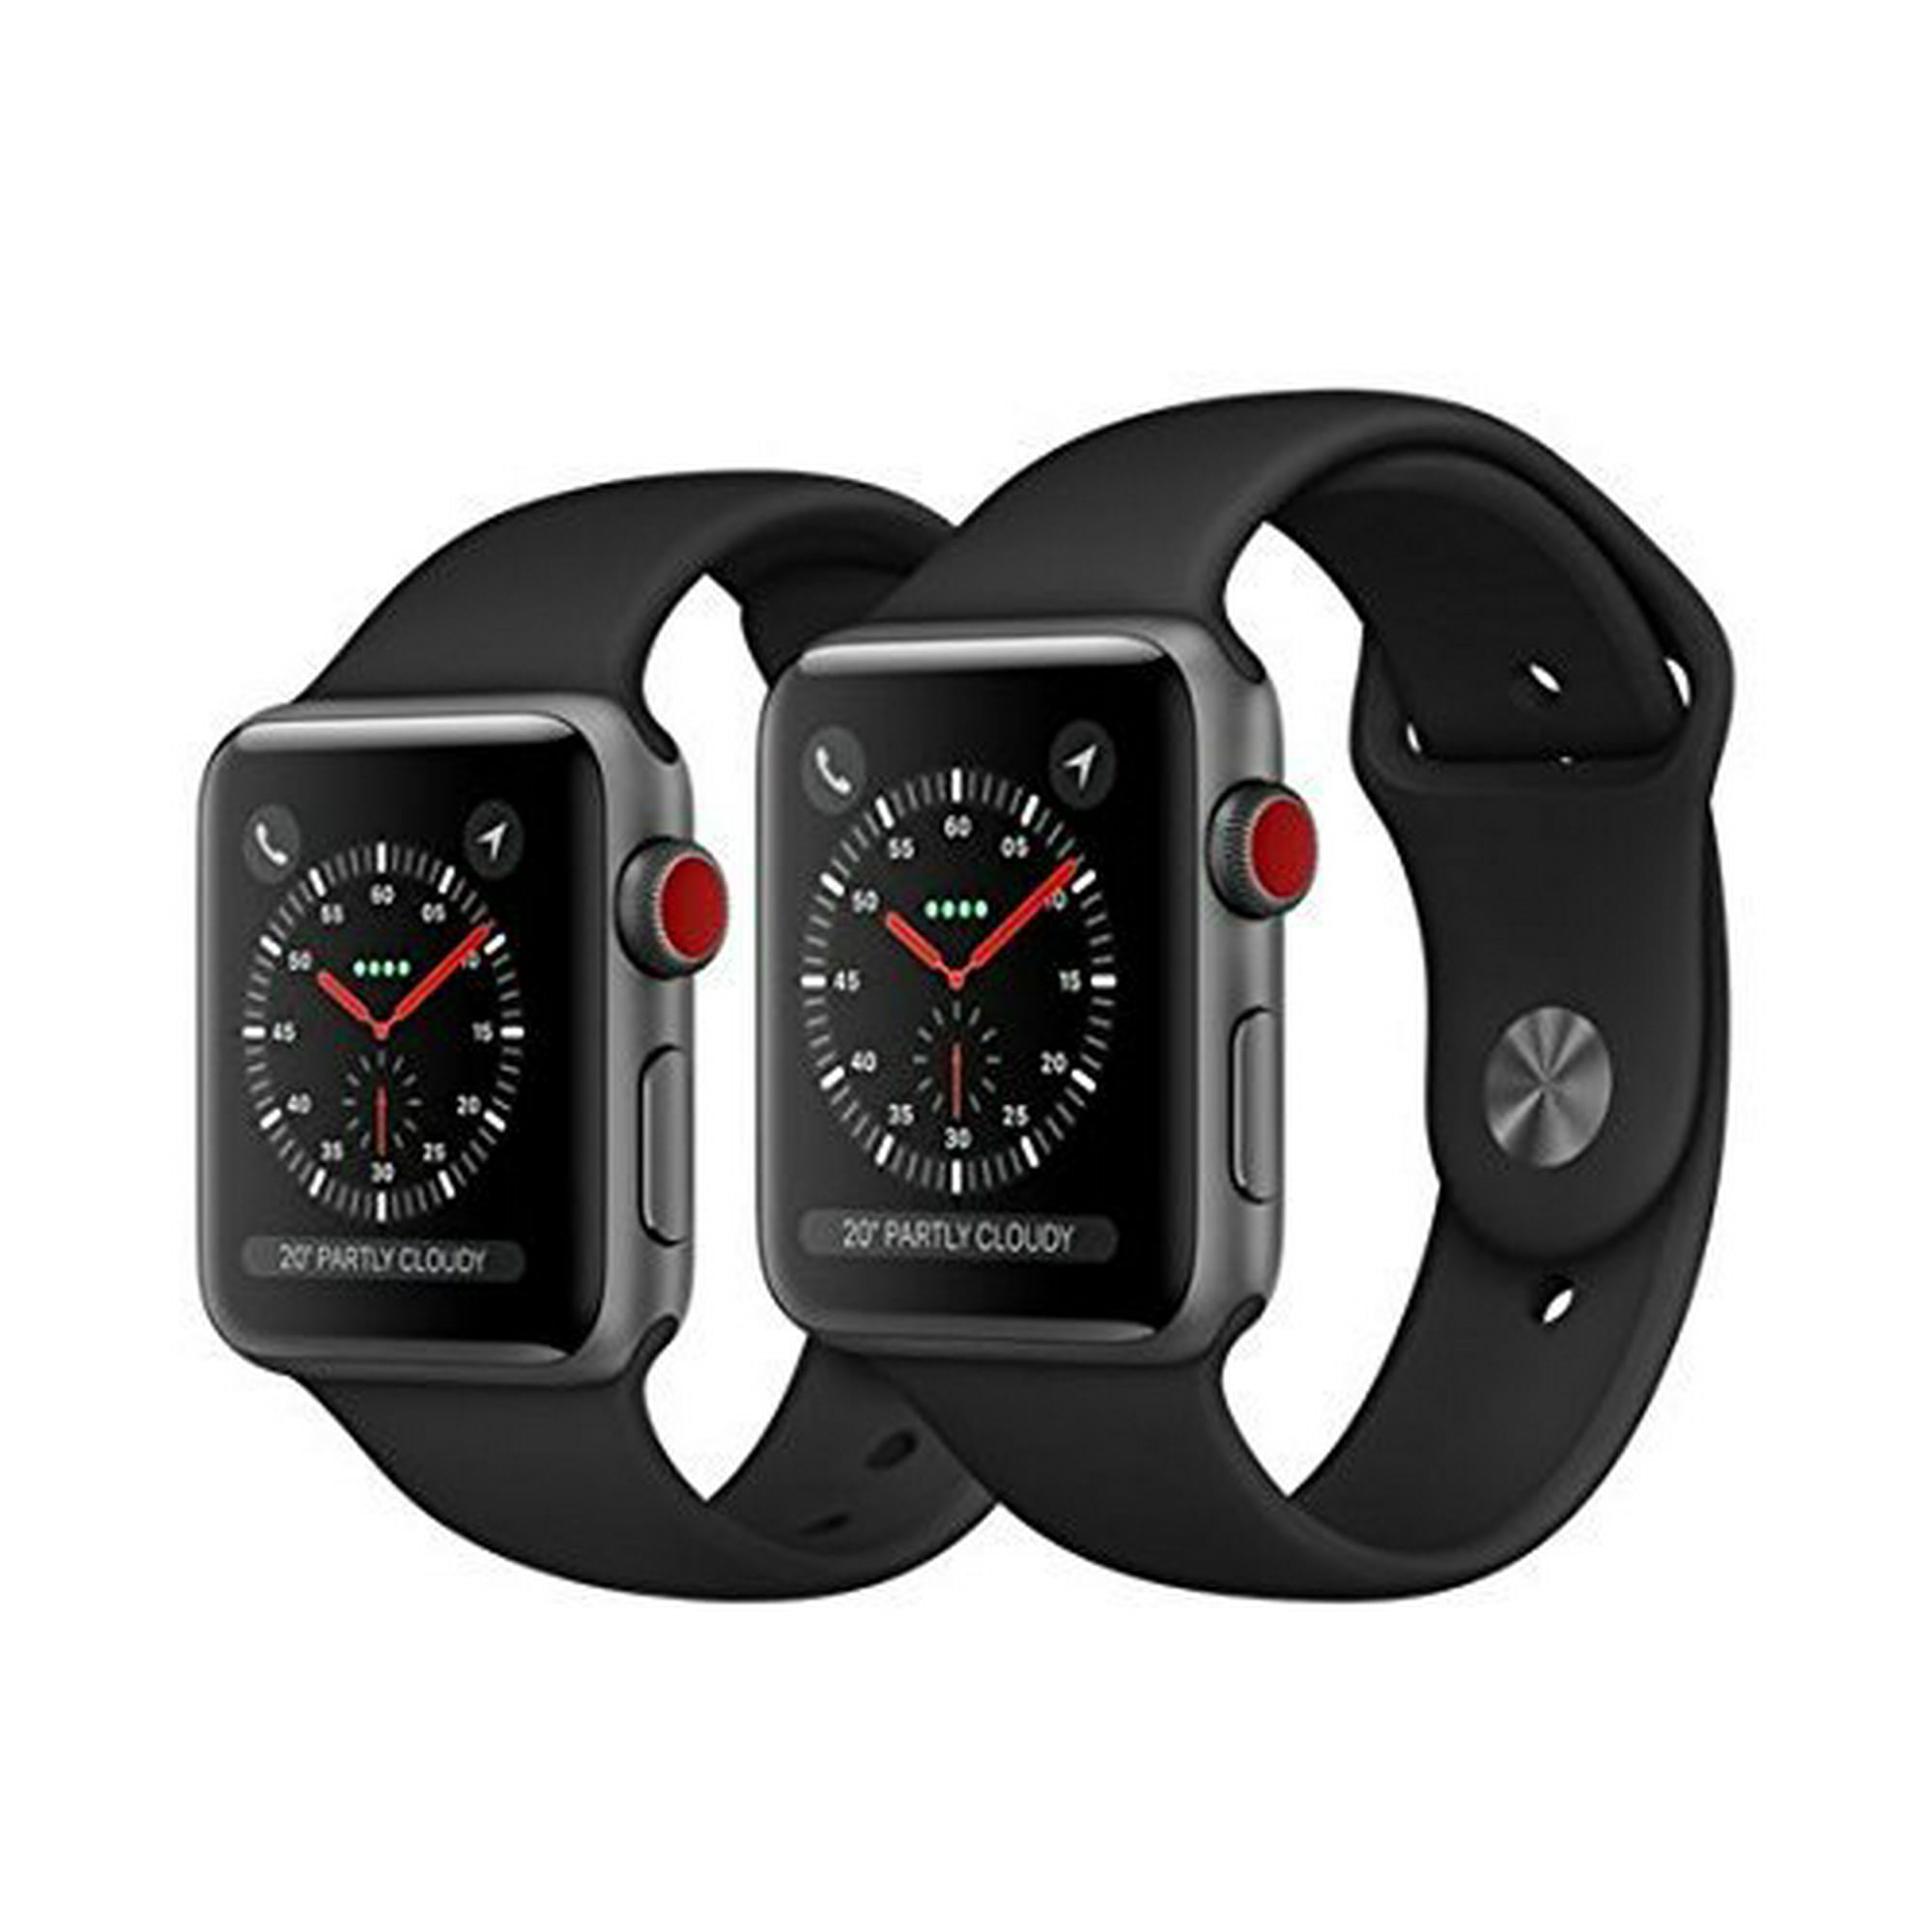 Apple Watch Series 3 (GPS + Cellular), 42mm Space Gray Aluminum